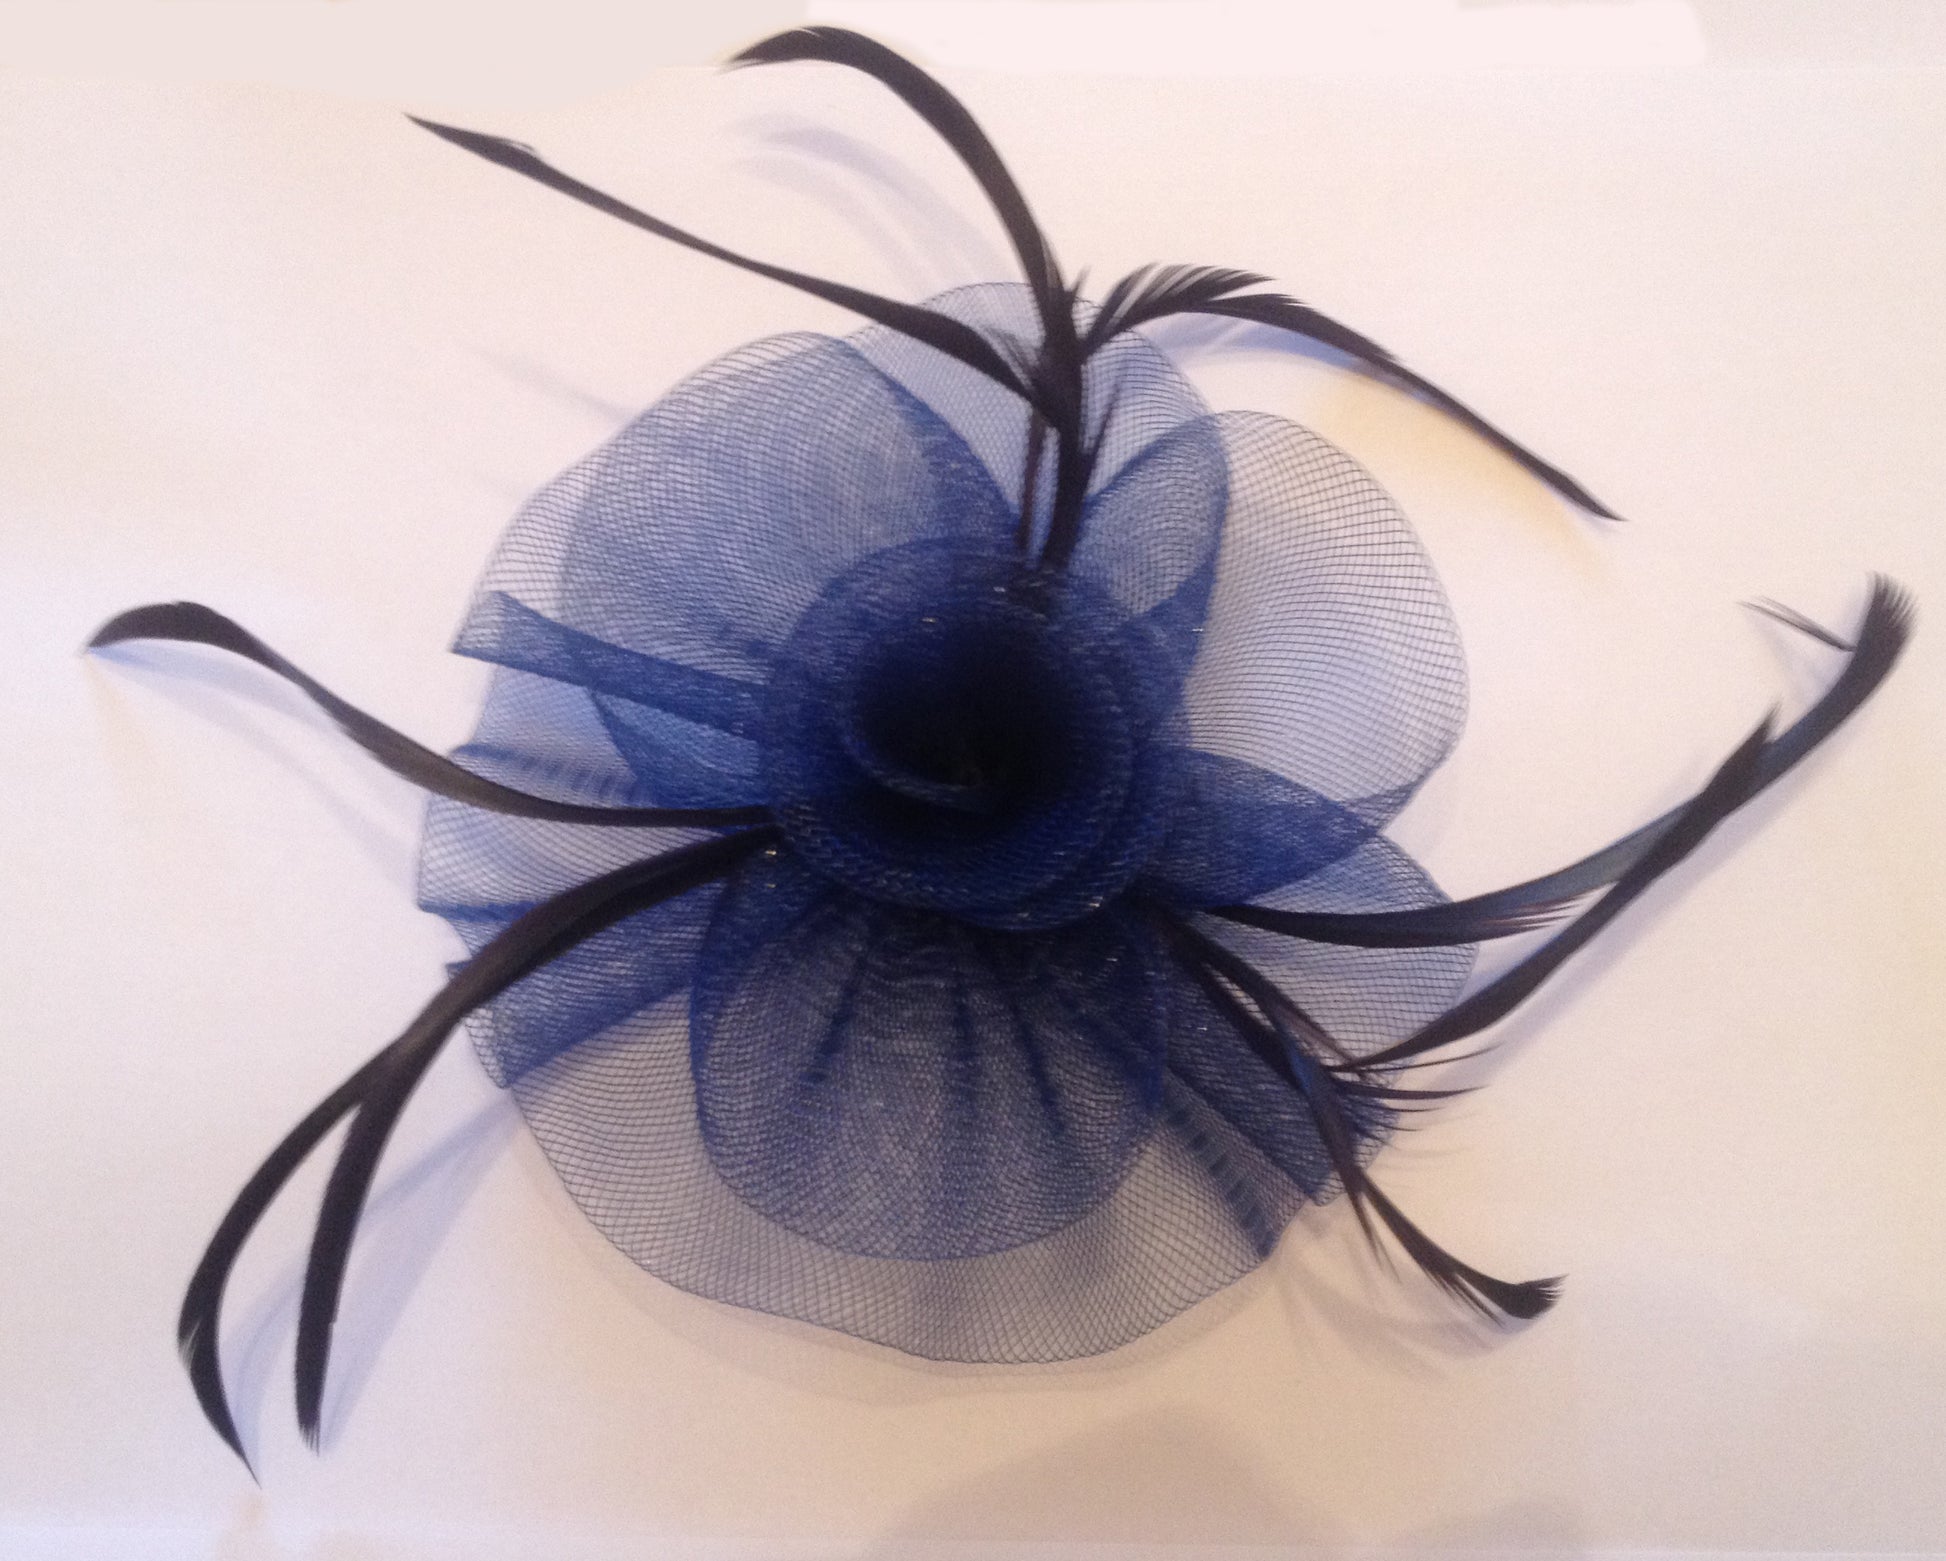 Blue Fascinator, Suitable for any occasion including cocktail parties, a day at the races, corporate events, funerals and other formal occasions